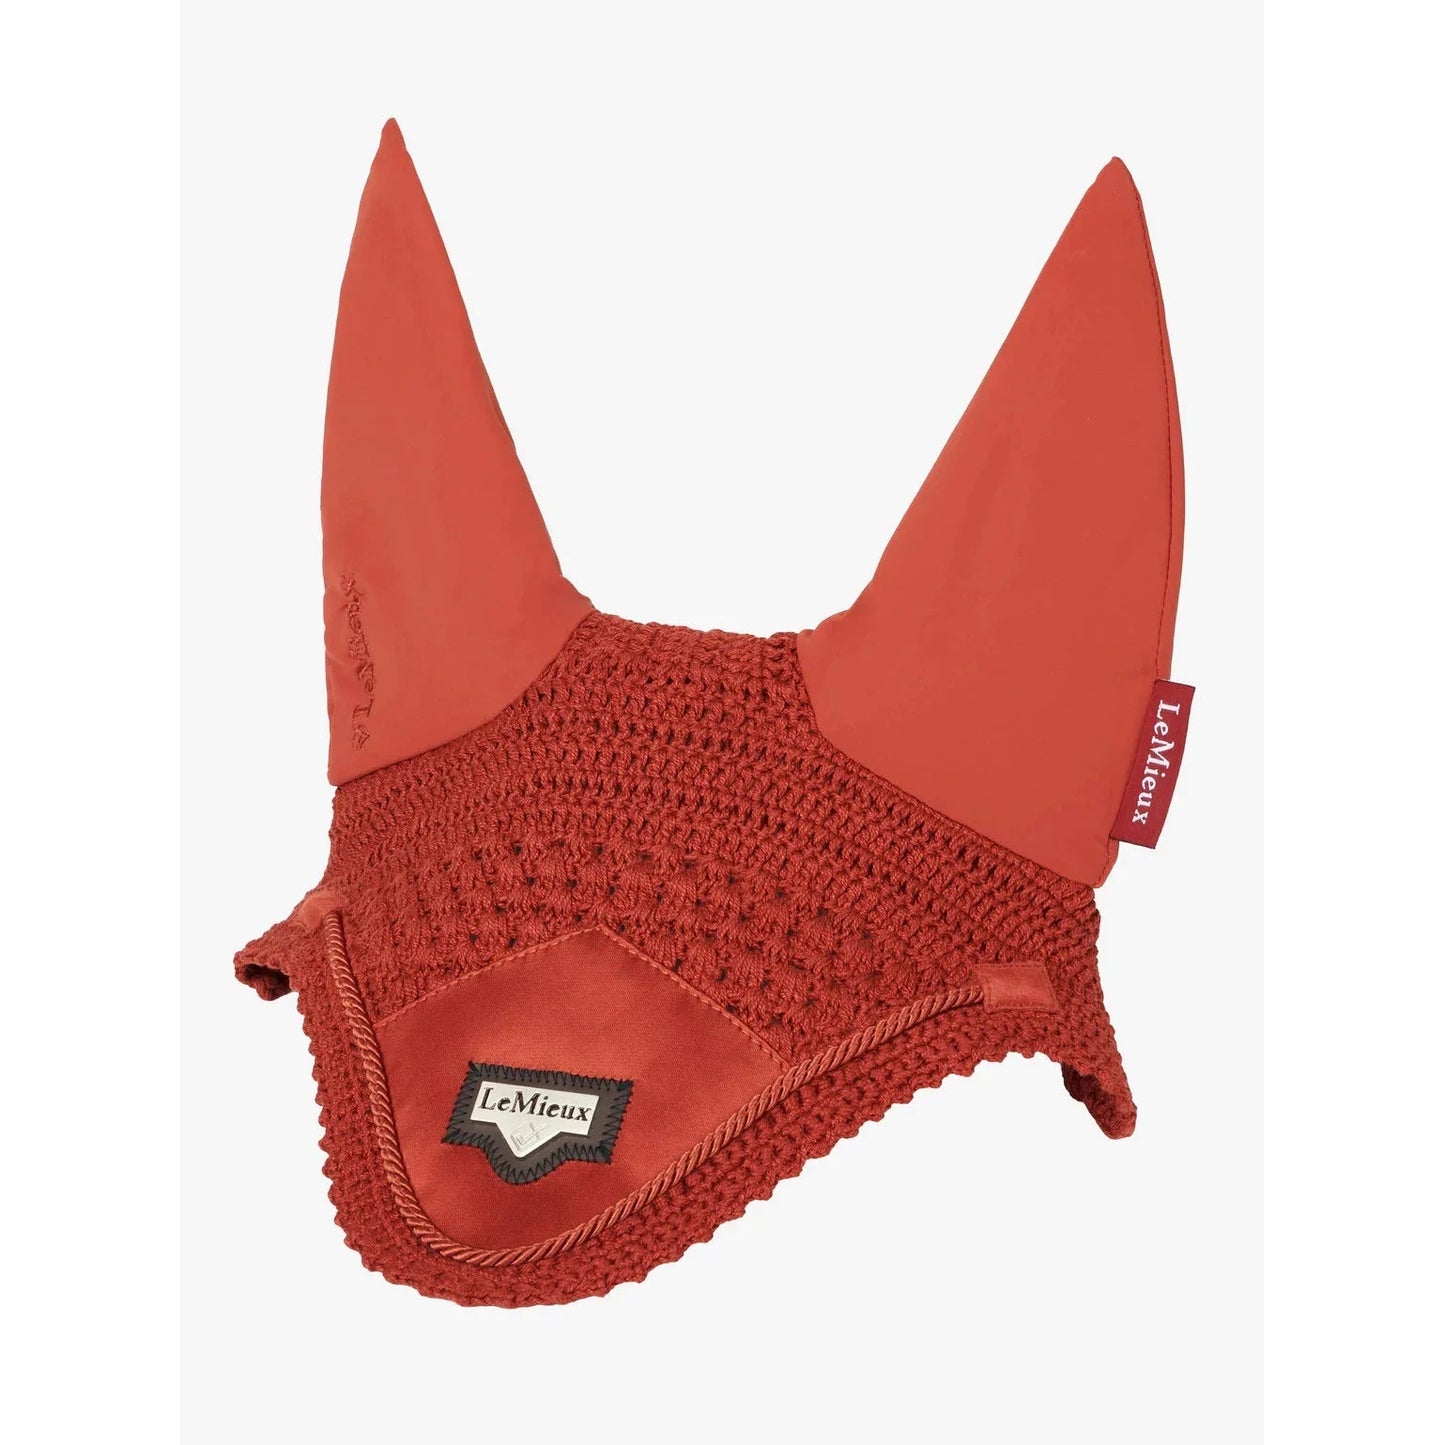 LeMieux Loire Fly Hood-Southern Sport Horses-The Equestrian